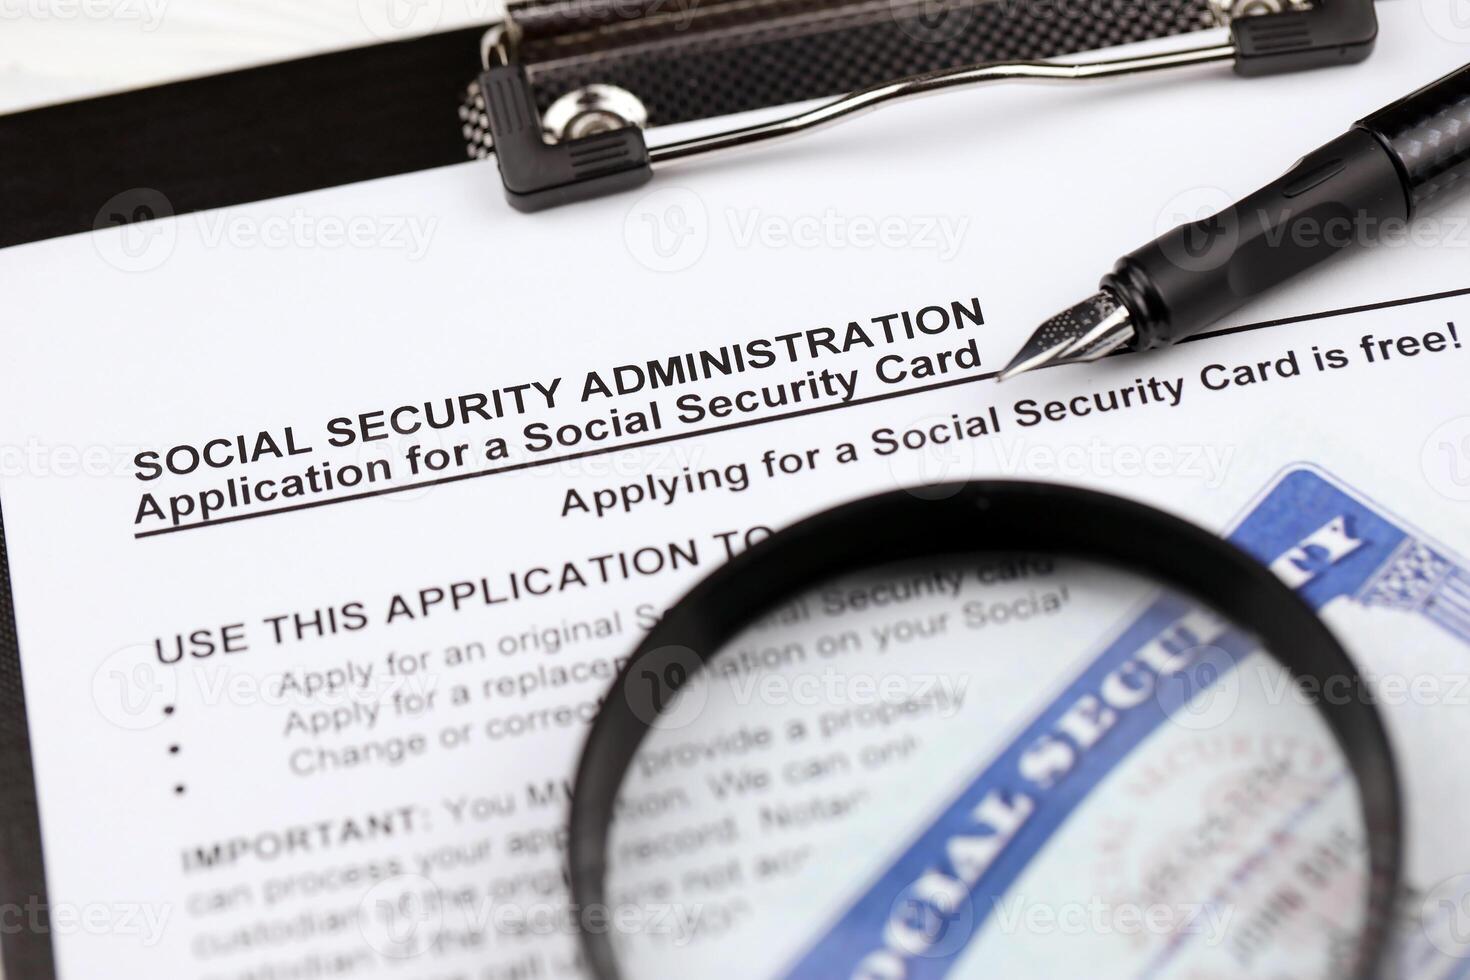 United States social security number cards lies on Application from social security administration on A4 tablet lies on office table with pen and magnifying glass photo